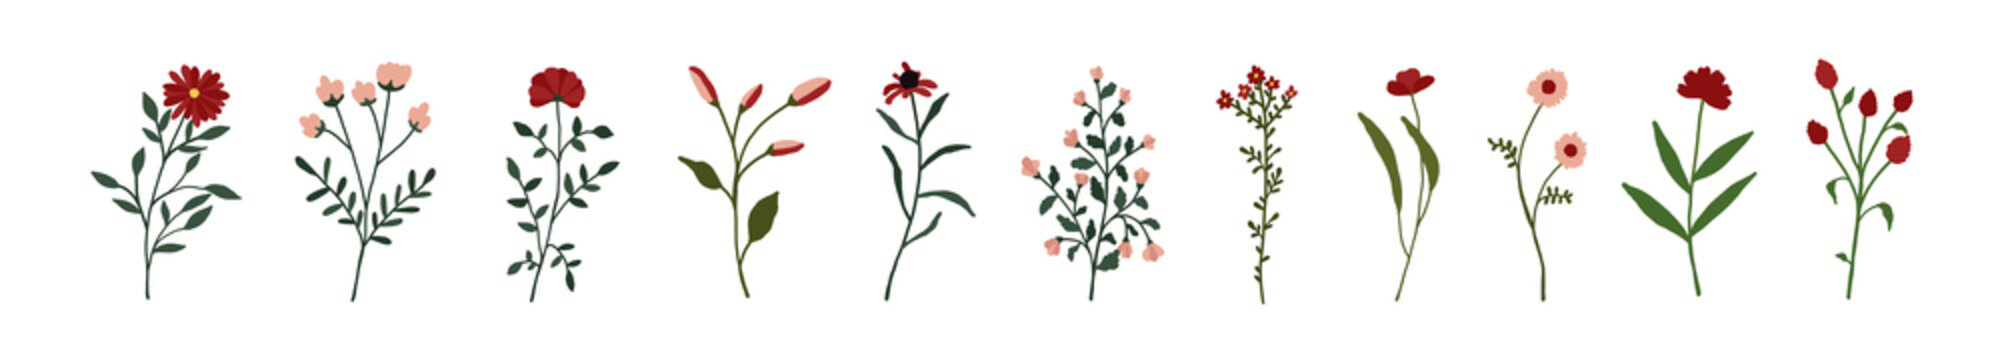 Red wildflowers set. Pink wild flowers floral botanical plants. Meadow and field herbs. Delicate summer flowers illustration in hand drawn flat style isolated on white background